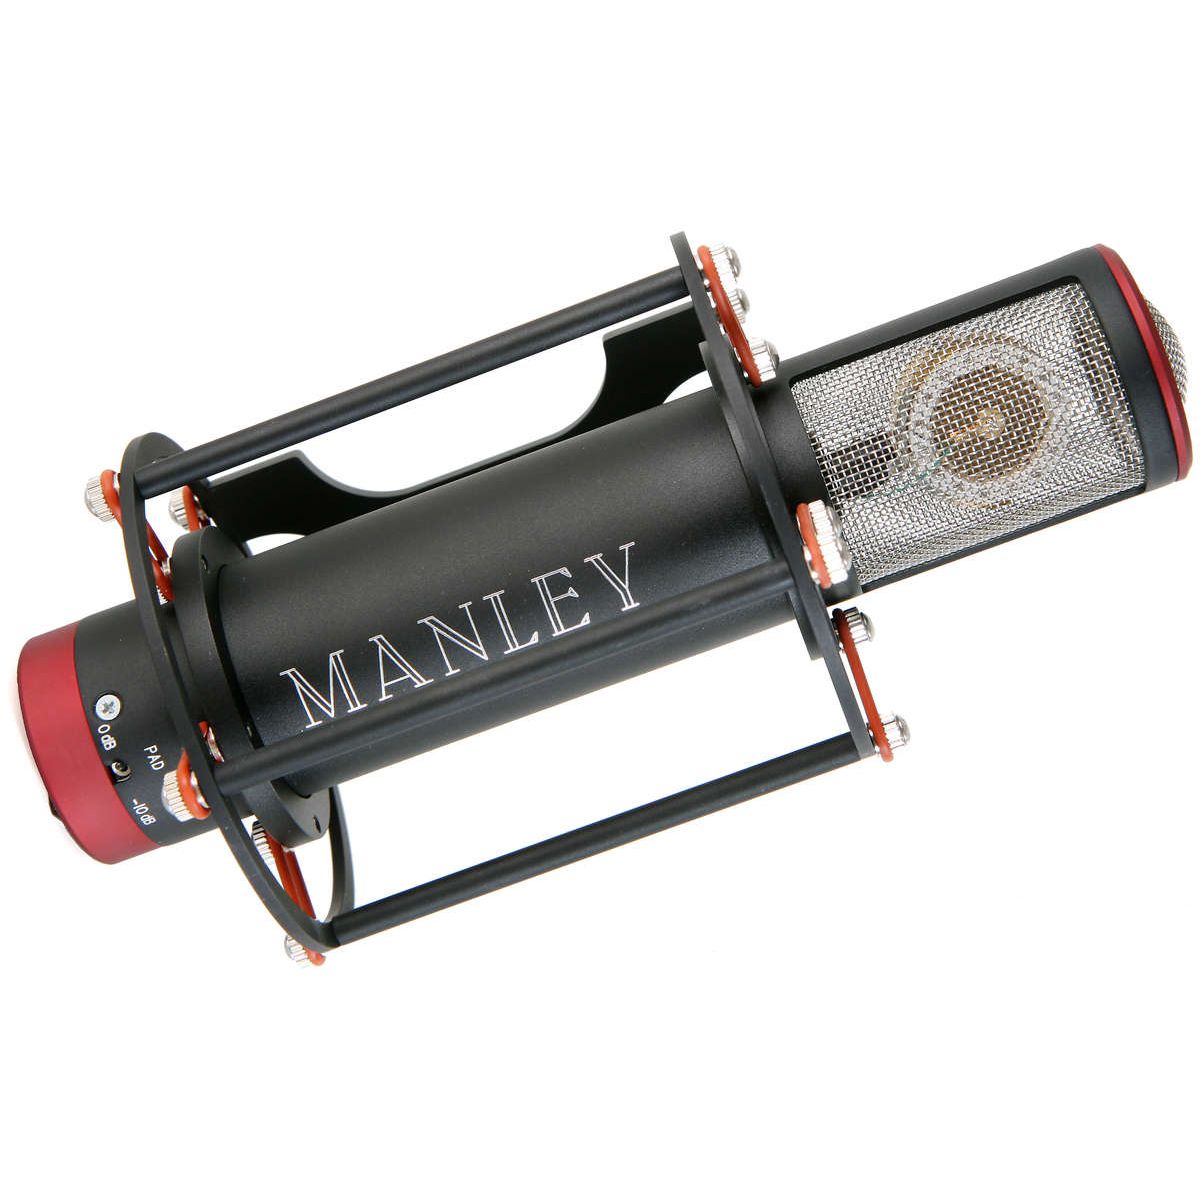 Manley Reference Cardioid